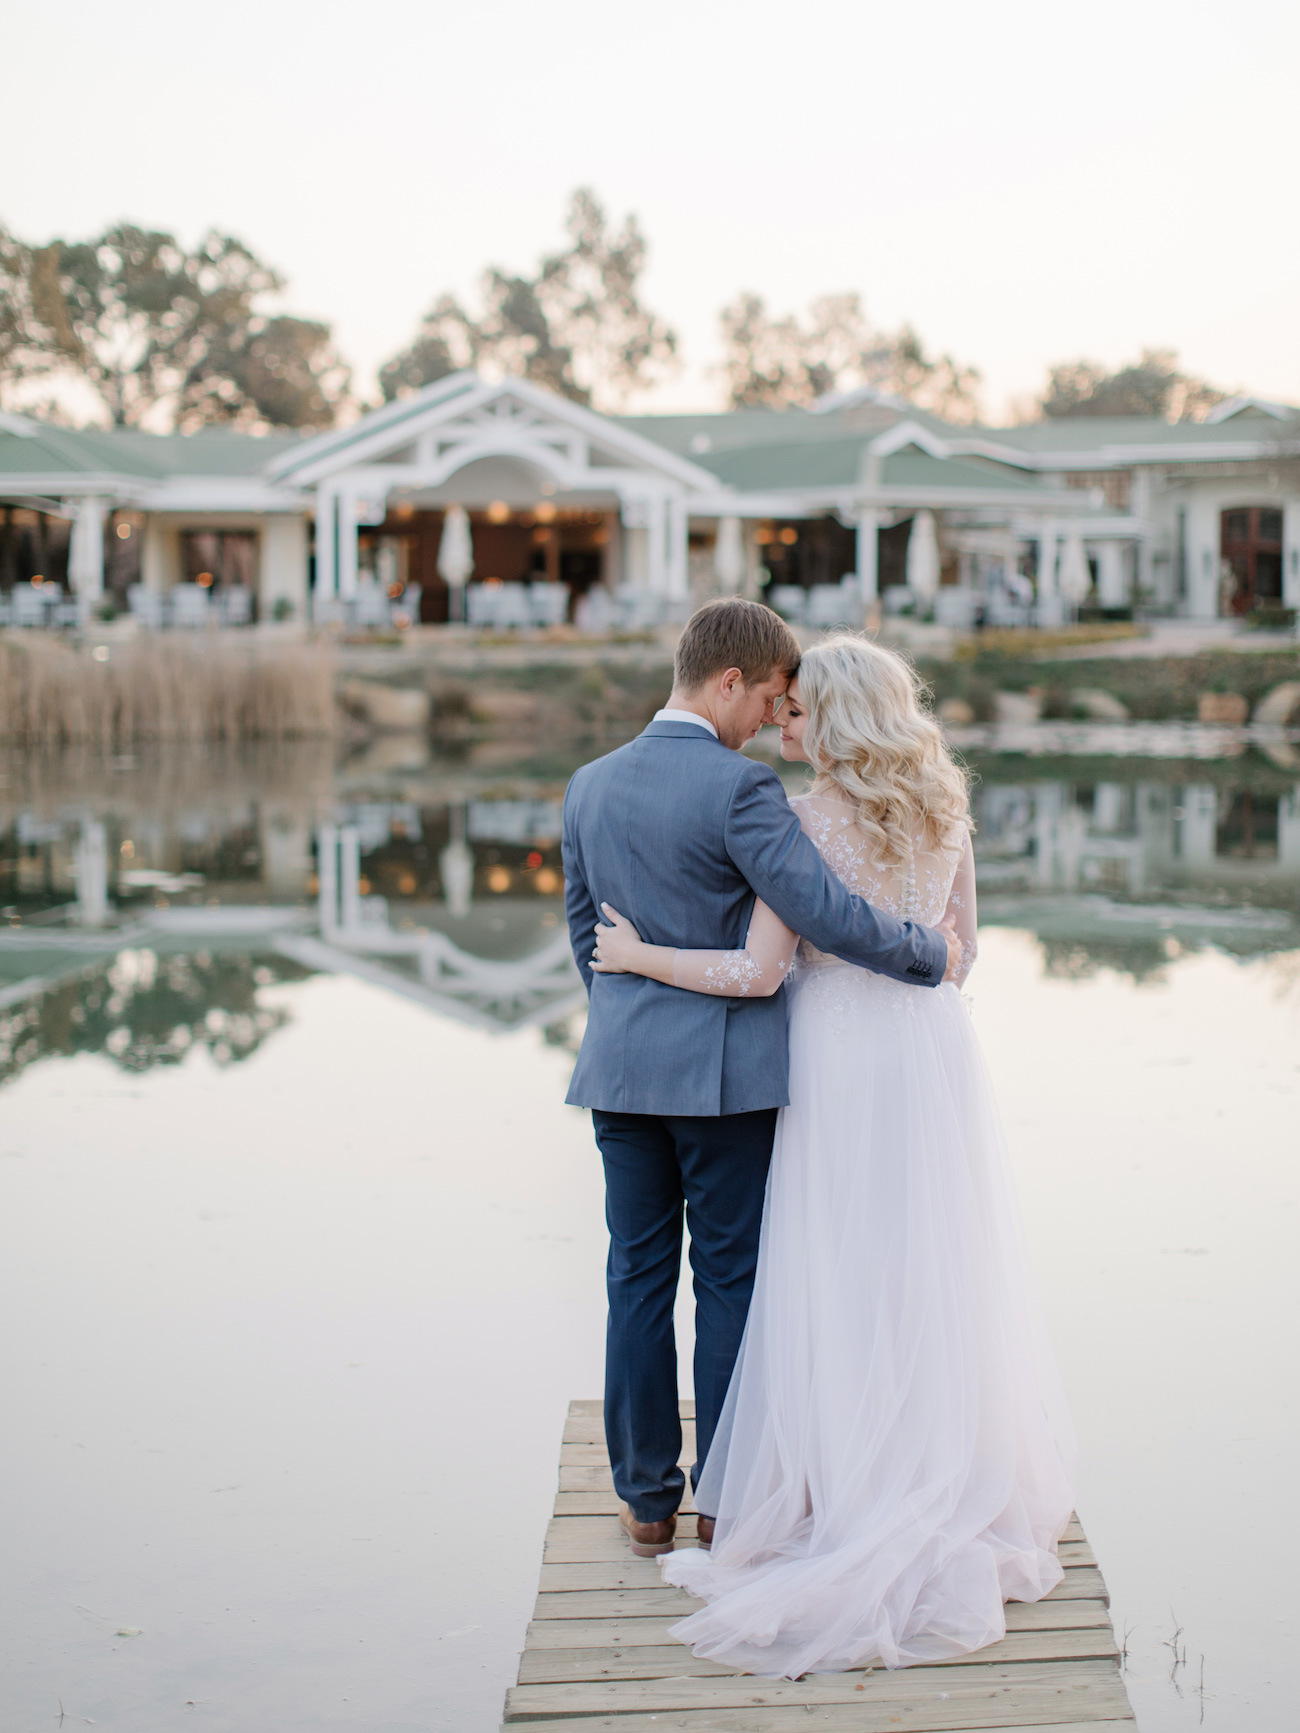 Bride & Groom at Oxbow Country Estate | Image: Rensche Mari